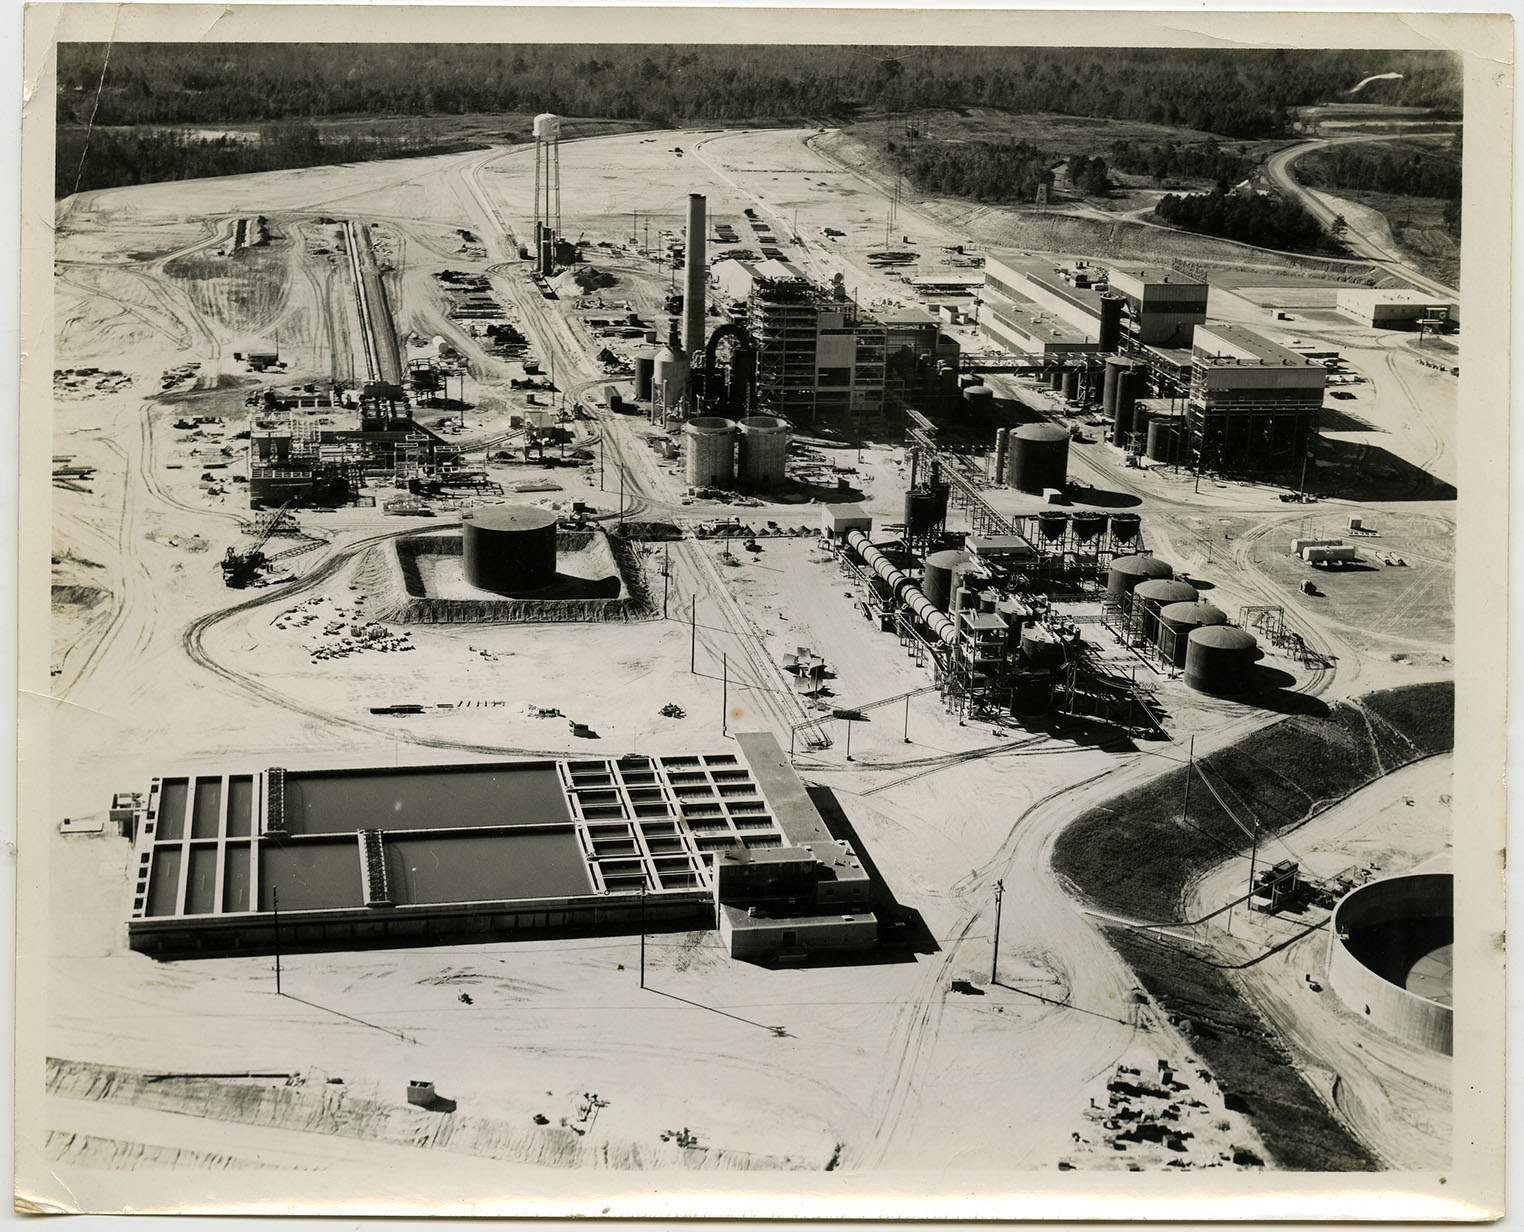 Bowater Carolina Pulp Plant Under Construction, 1959 by Rock Hill Photographer Bob Bryant, Courtesy of the WU Pettus Archives - 2024